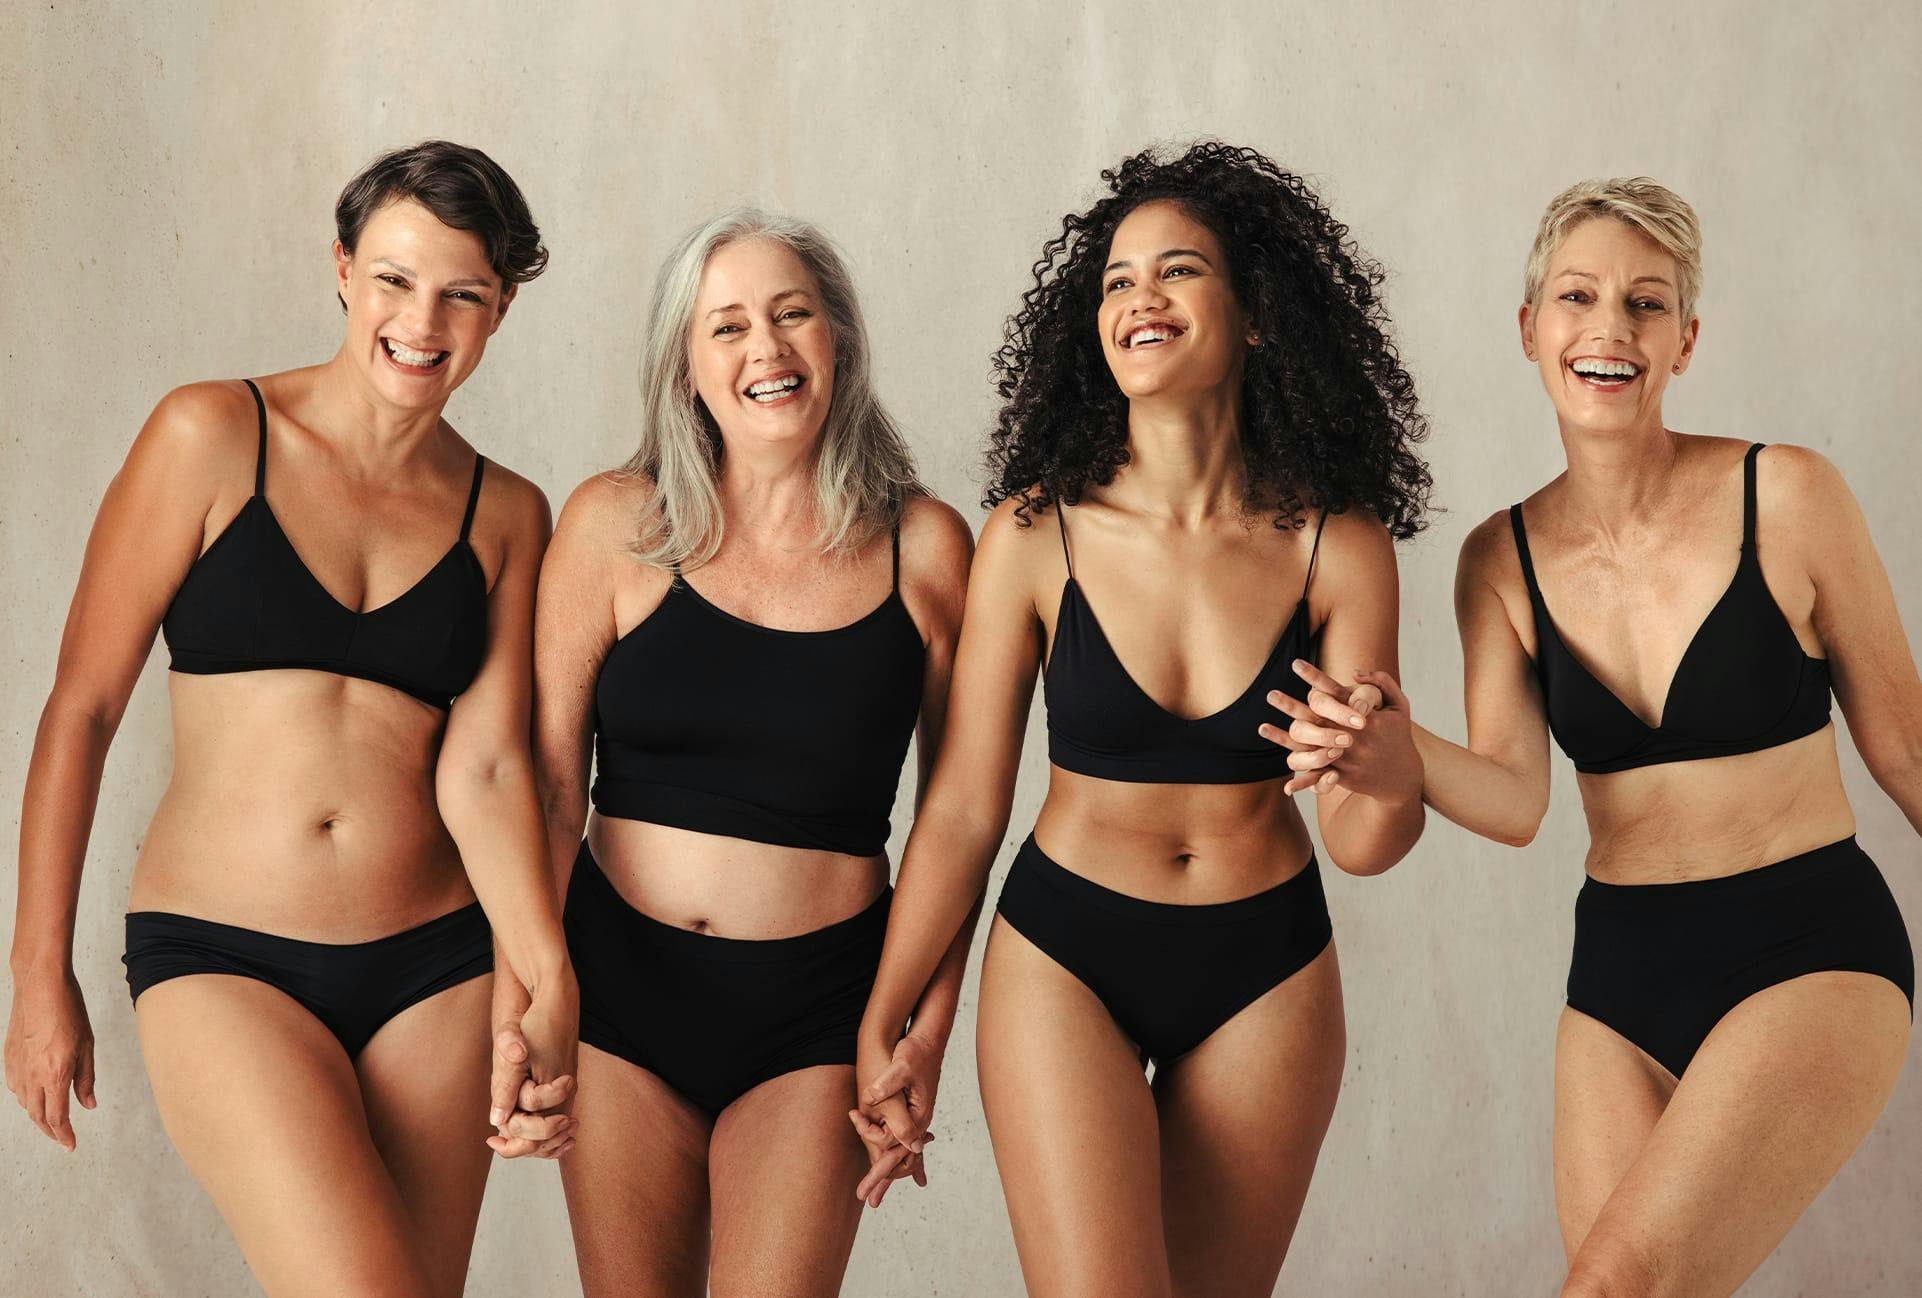 Group of Smiling Woman Wearing Black Under Garments